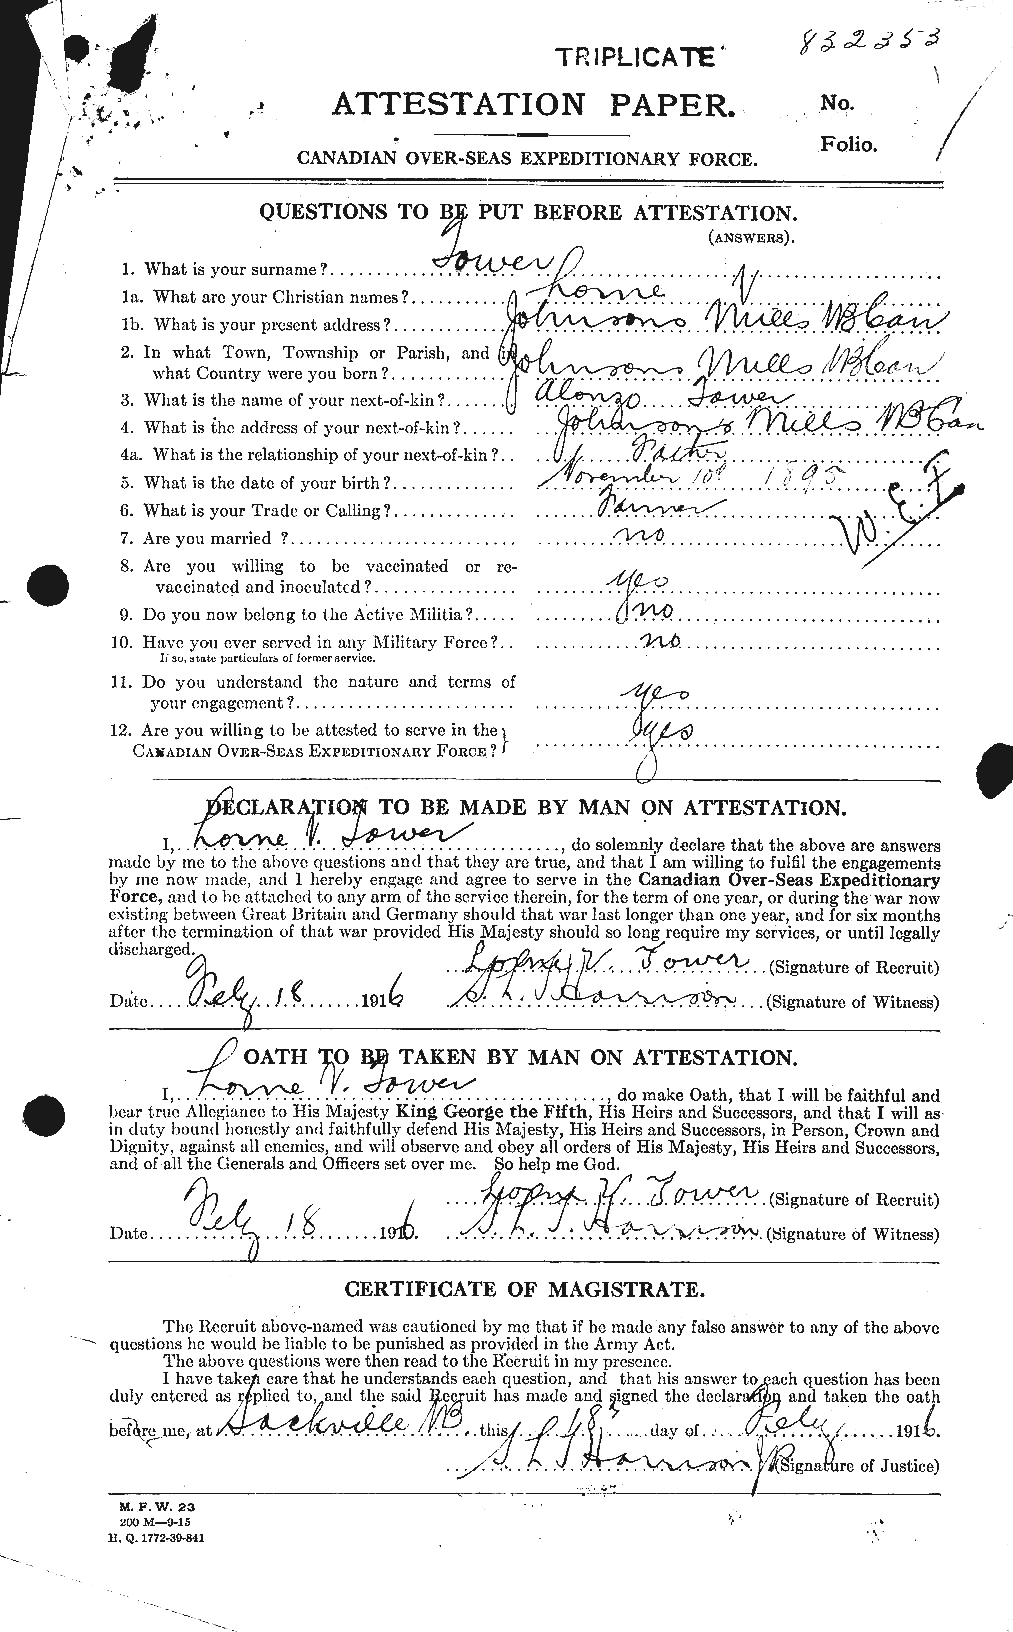 Personnel Records of the First World War - CEF 636198a